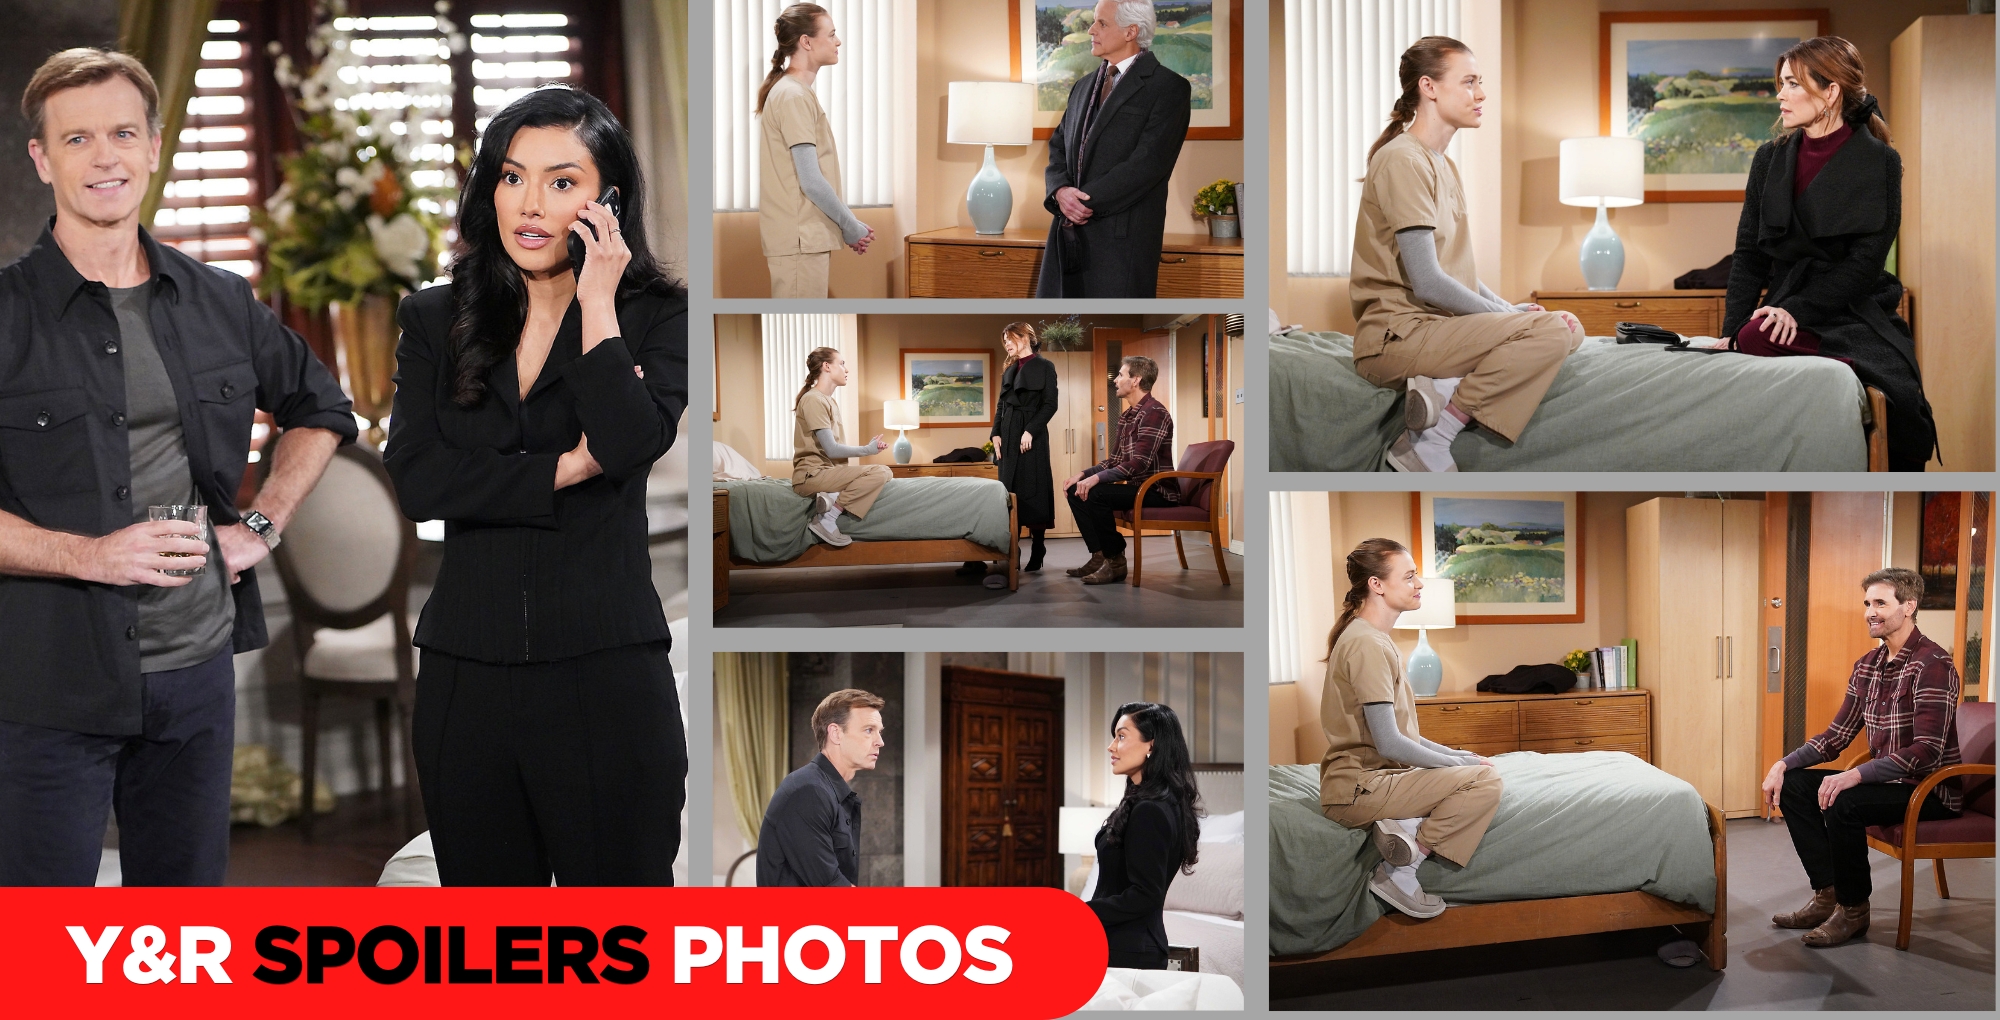 y&r spoilers photos collage for episode 12817.